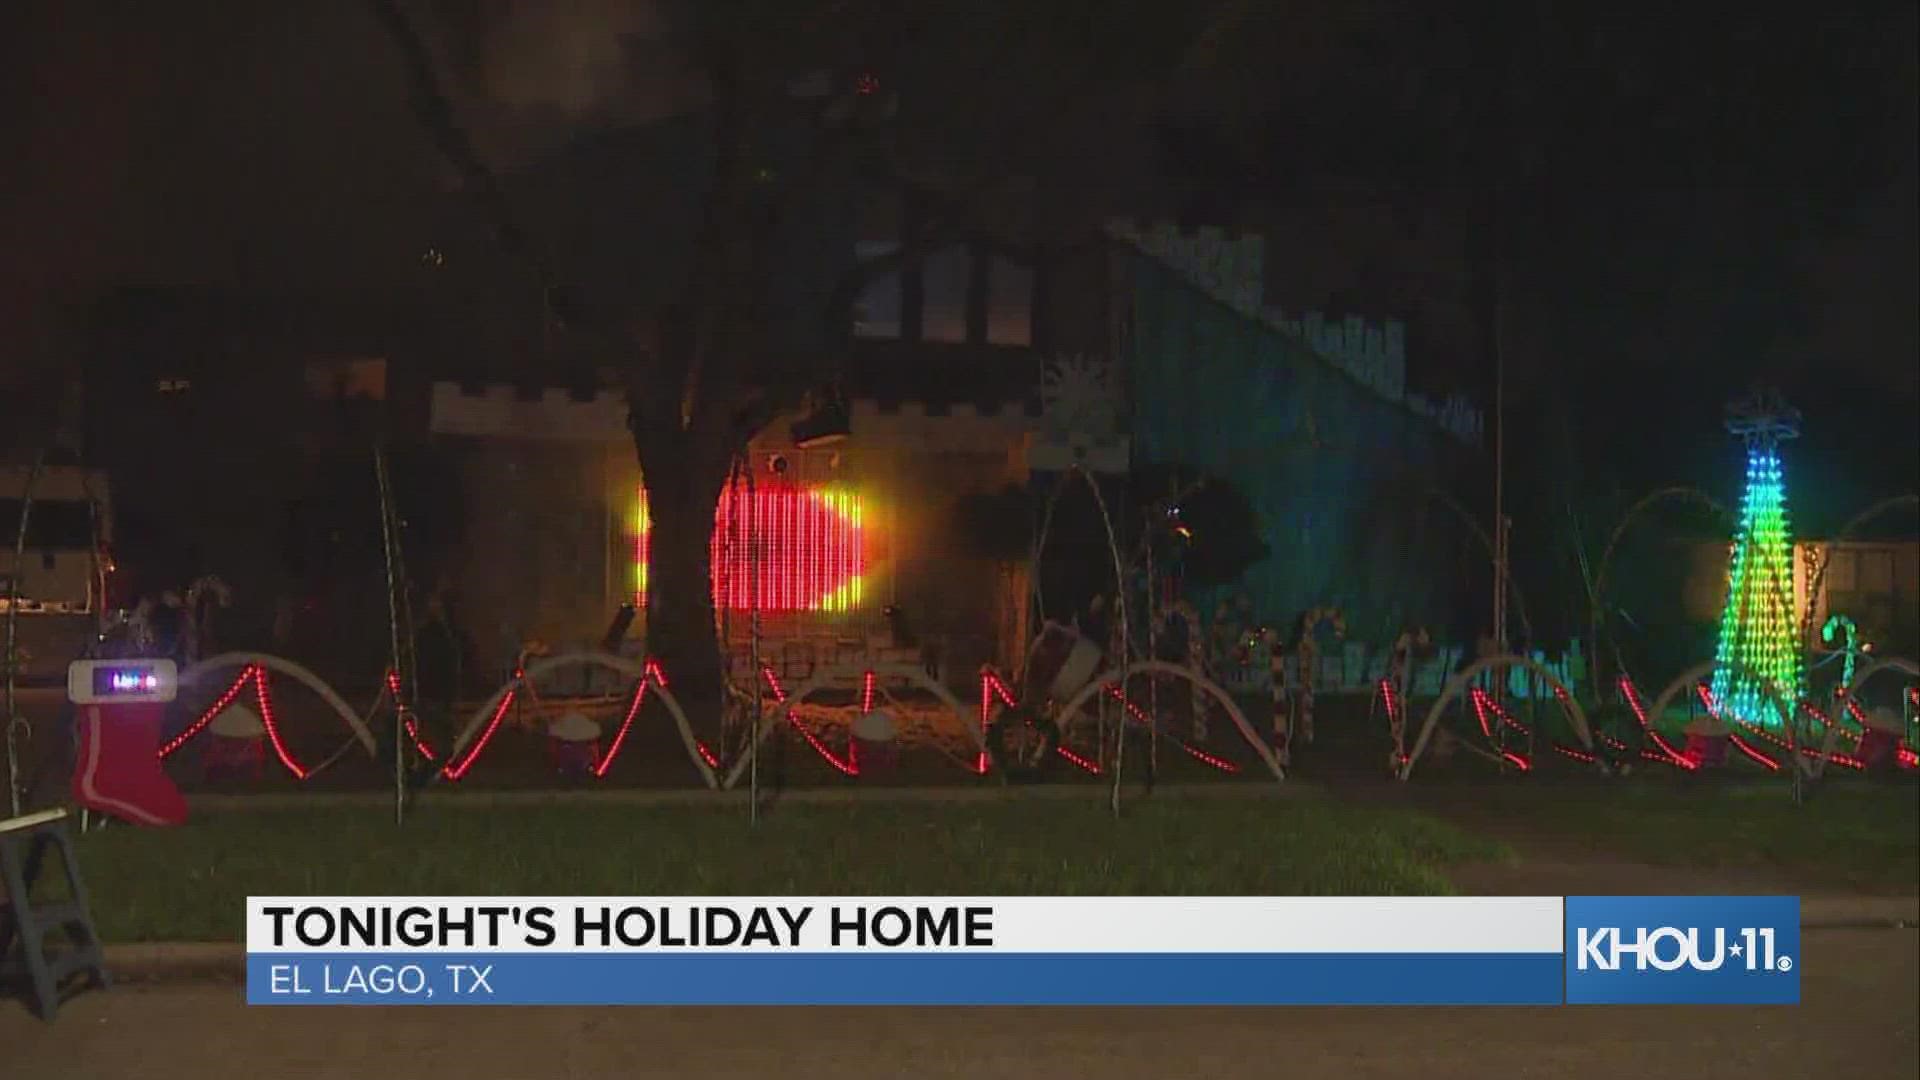 Brandi Smith takes you on a tour of the lights in El Lago.